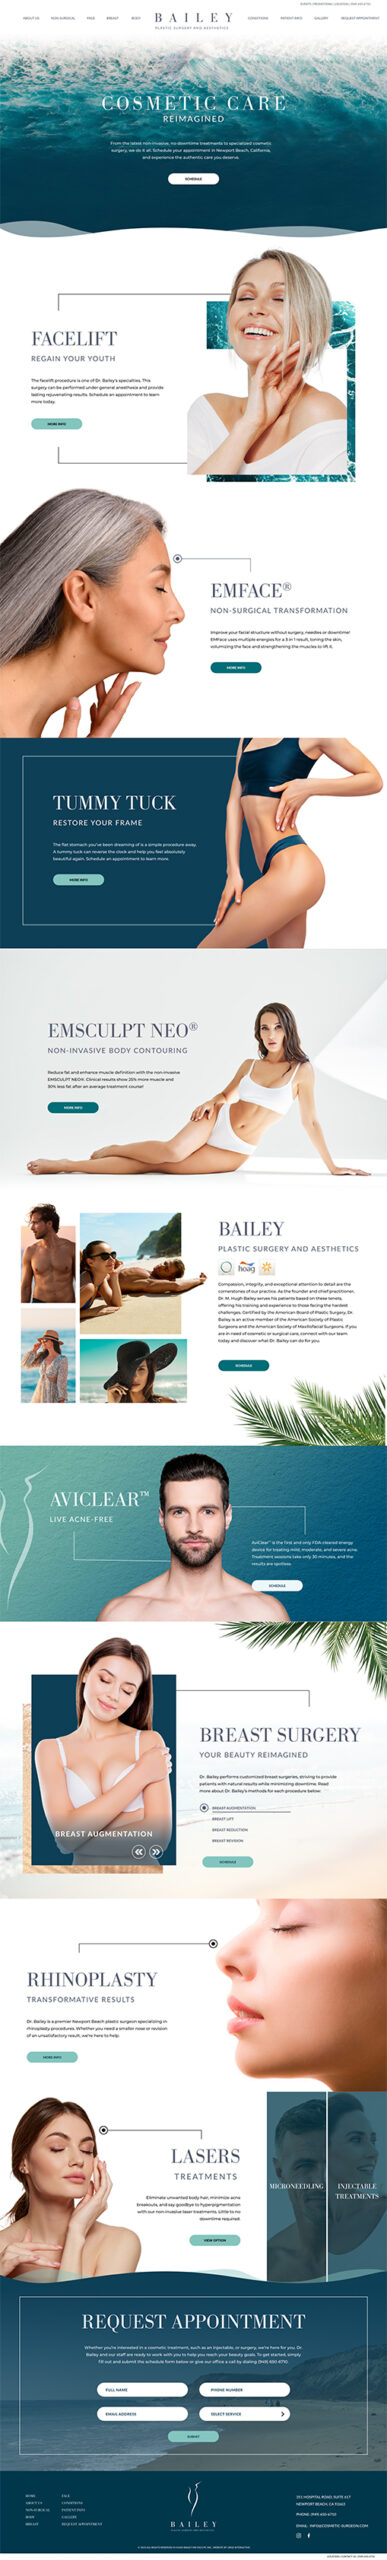 Image of the full Bailey homepage design